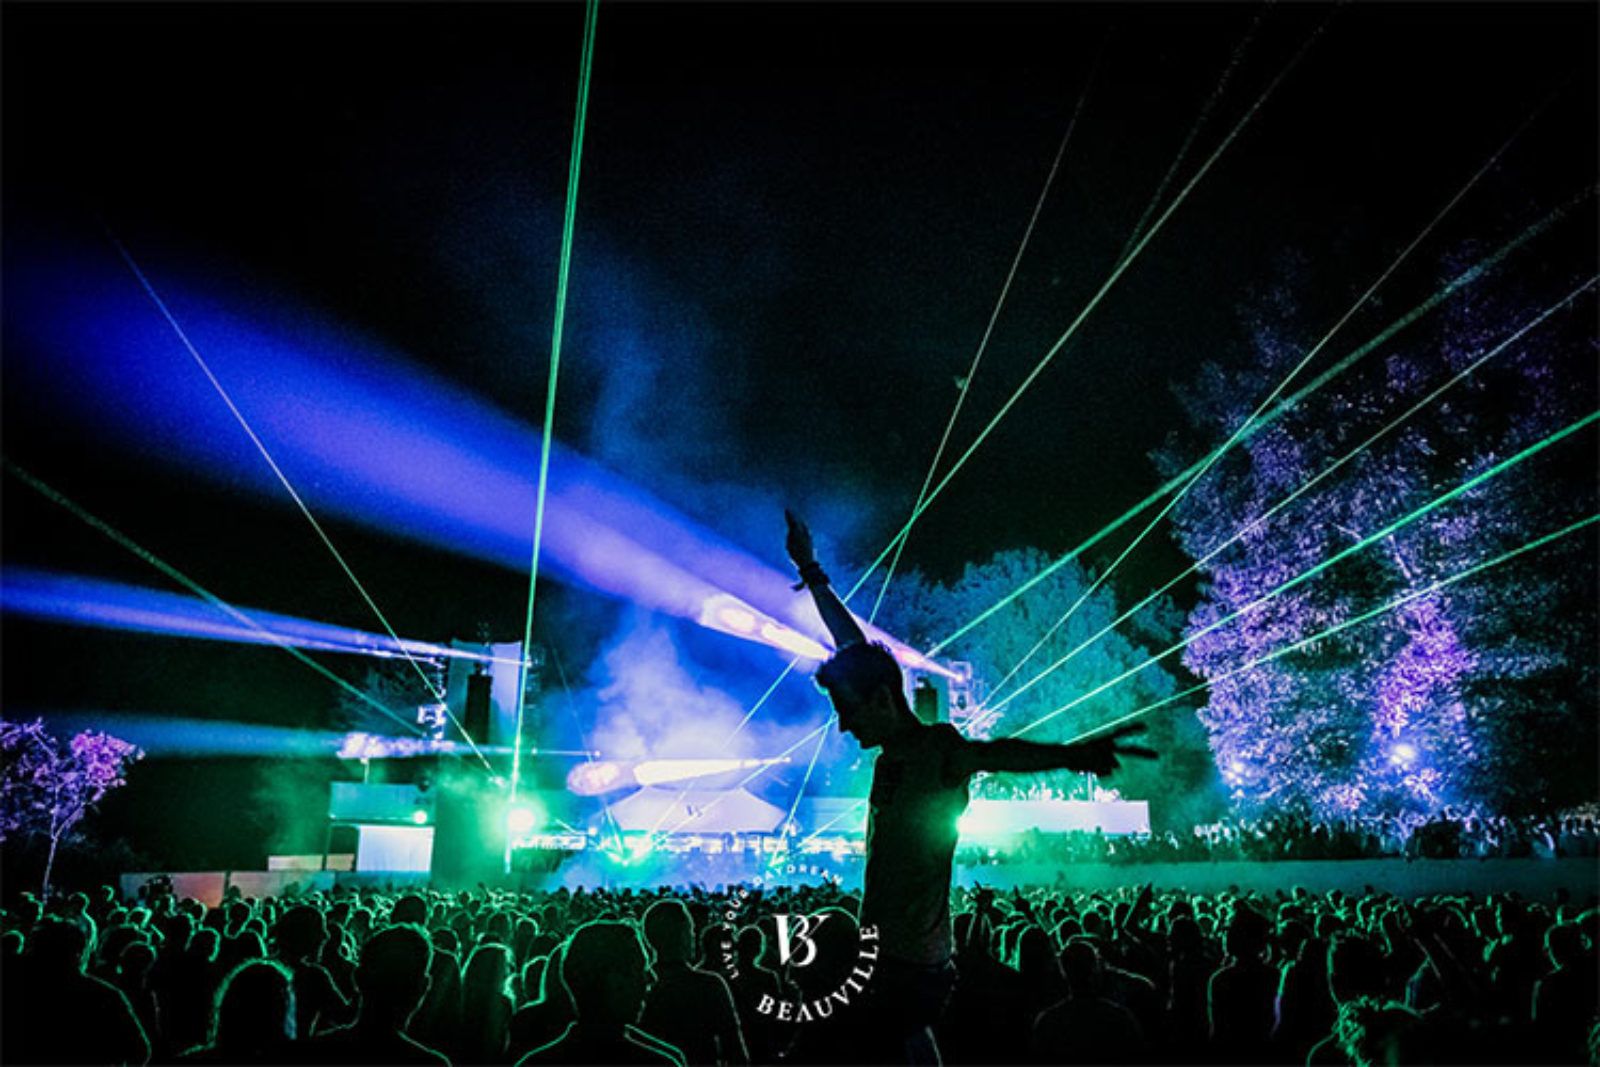 the vibe changes, and the lasers create a magic feeling!